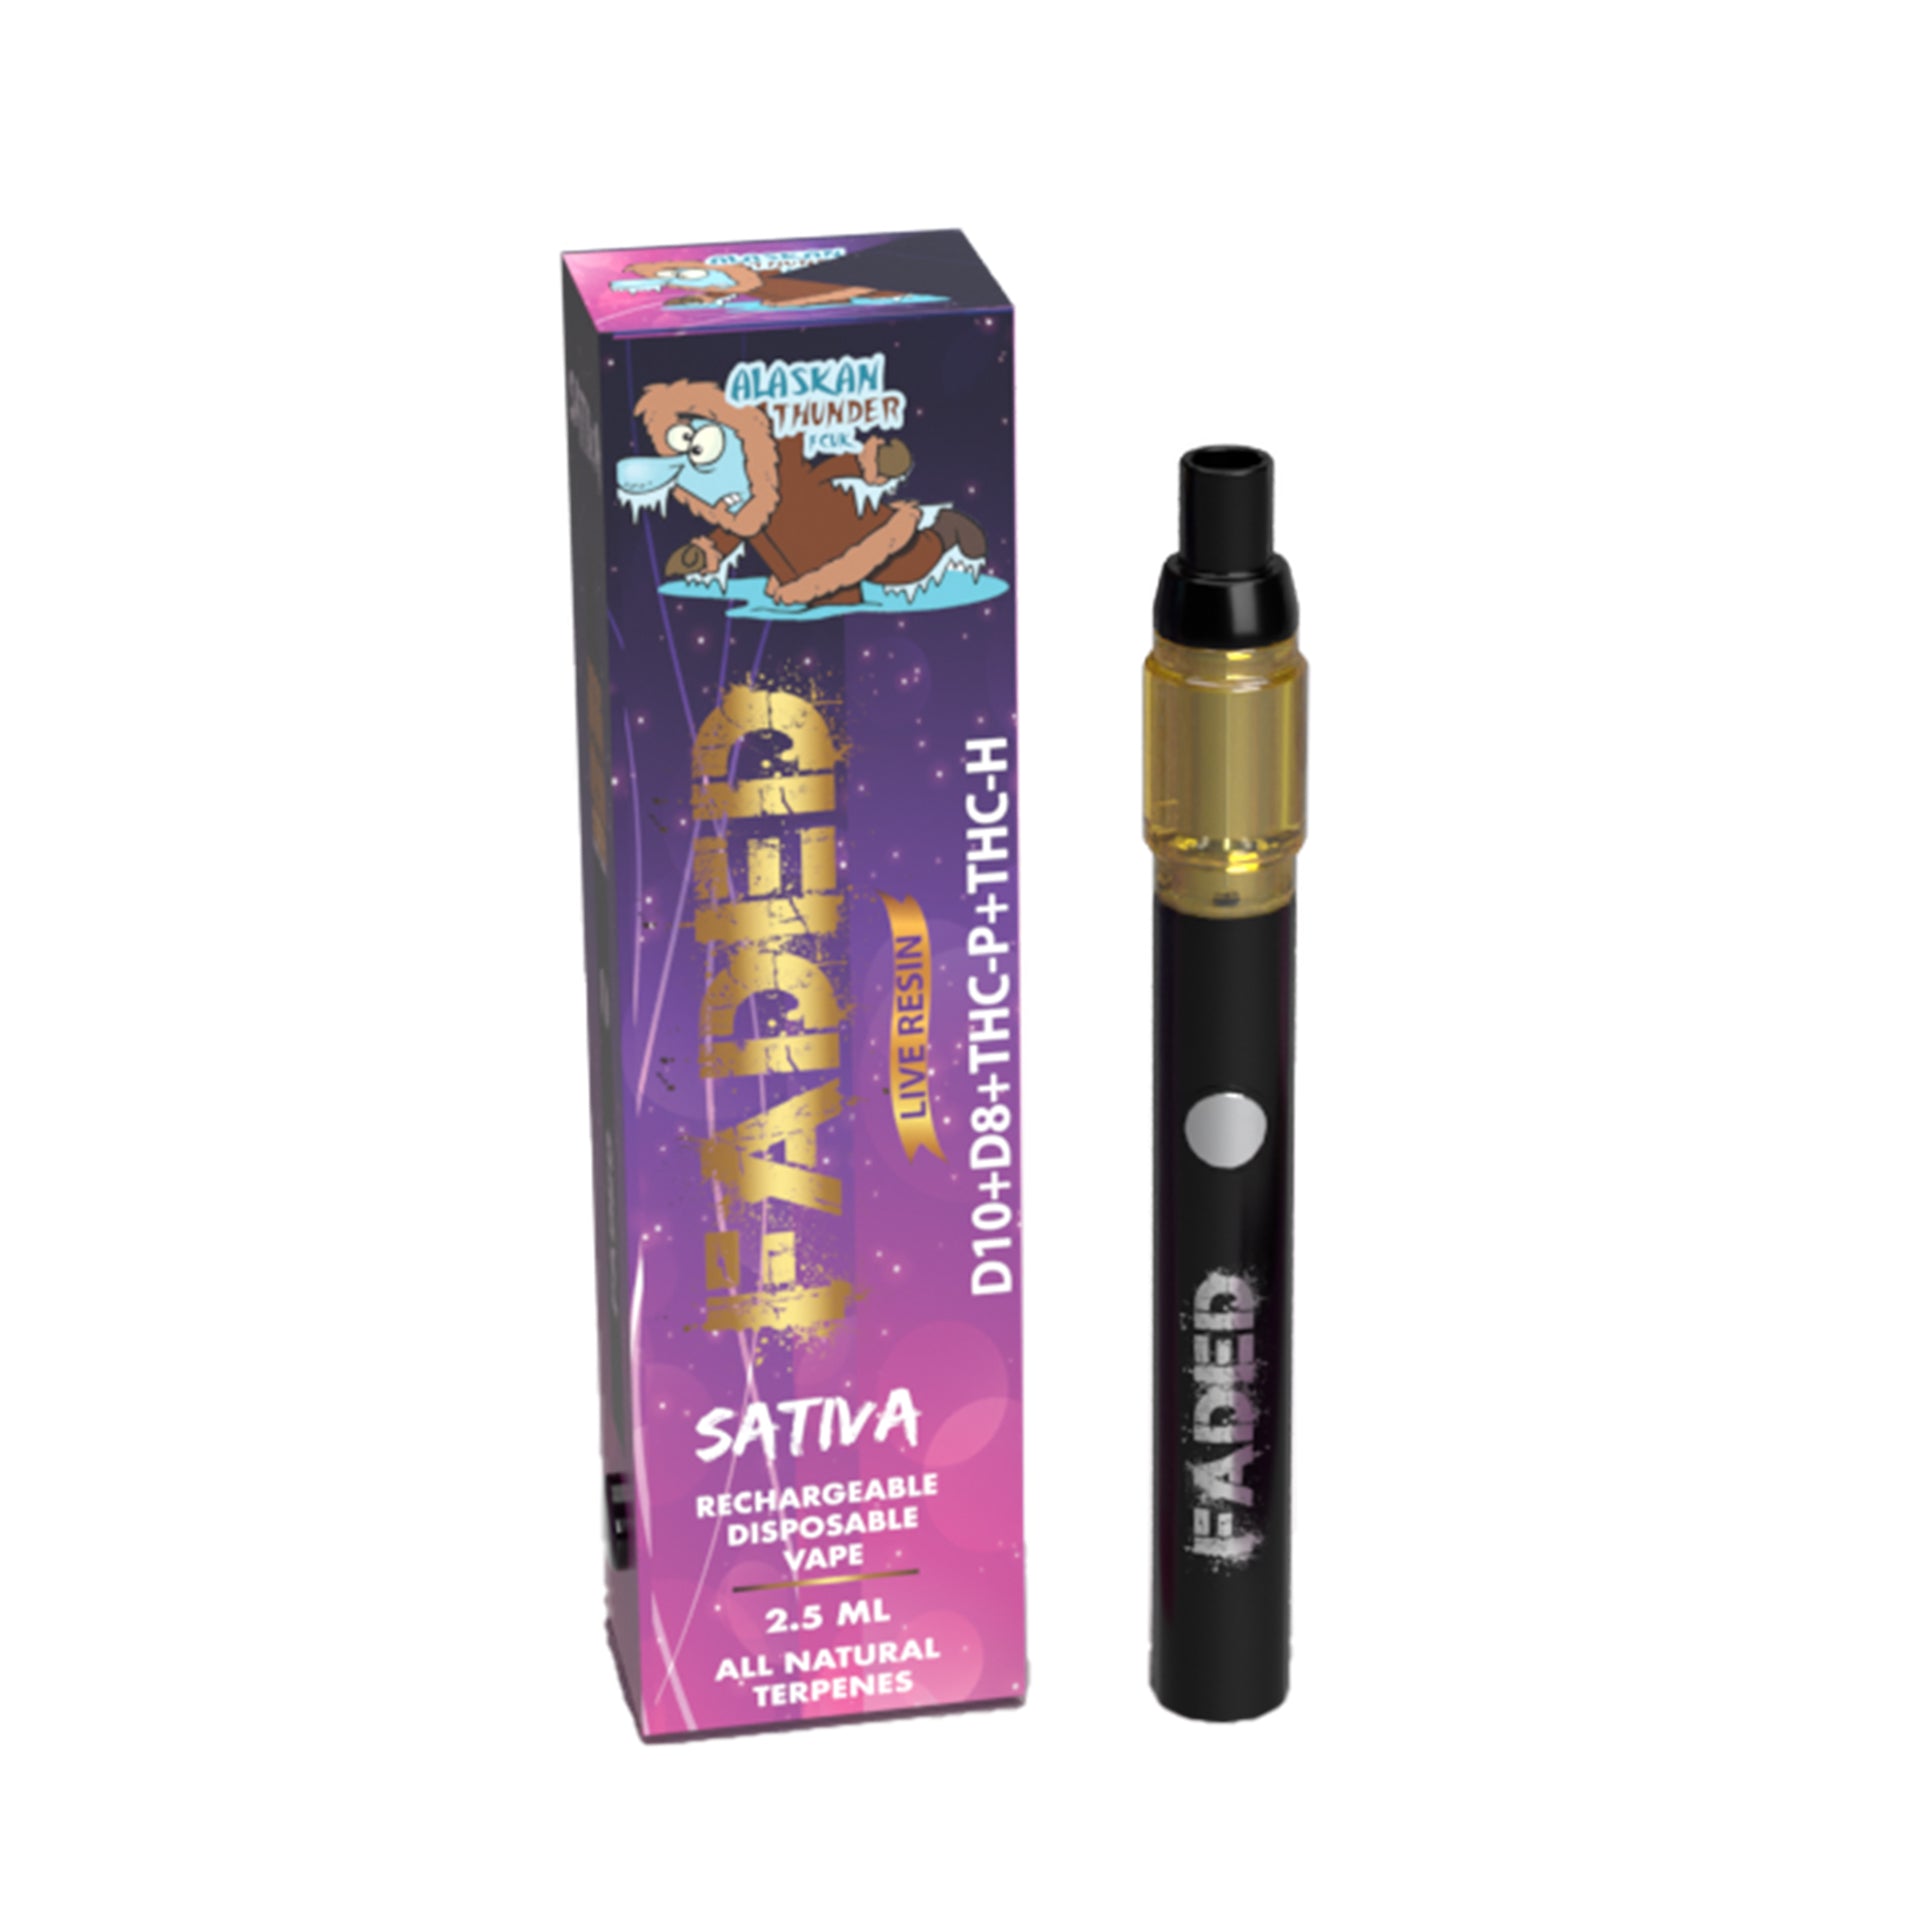 FADED D-10+D-8+THC-P+THC-H LIVE RESIN RECHARGEABLE DISPOSABLE - SATIVA ALASKAN THUNDER FCUK 2.5ML